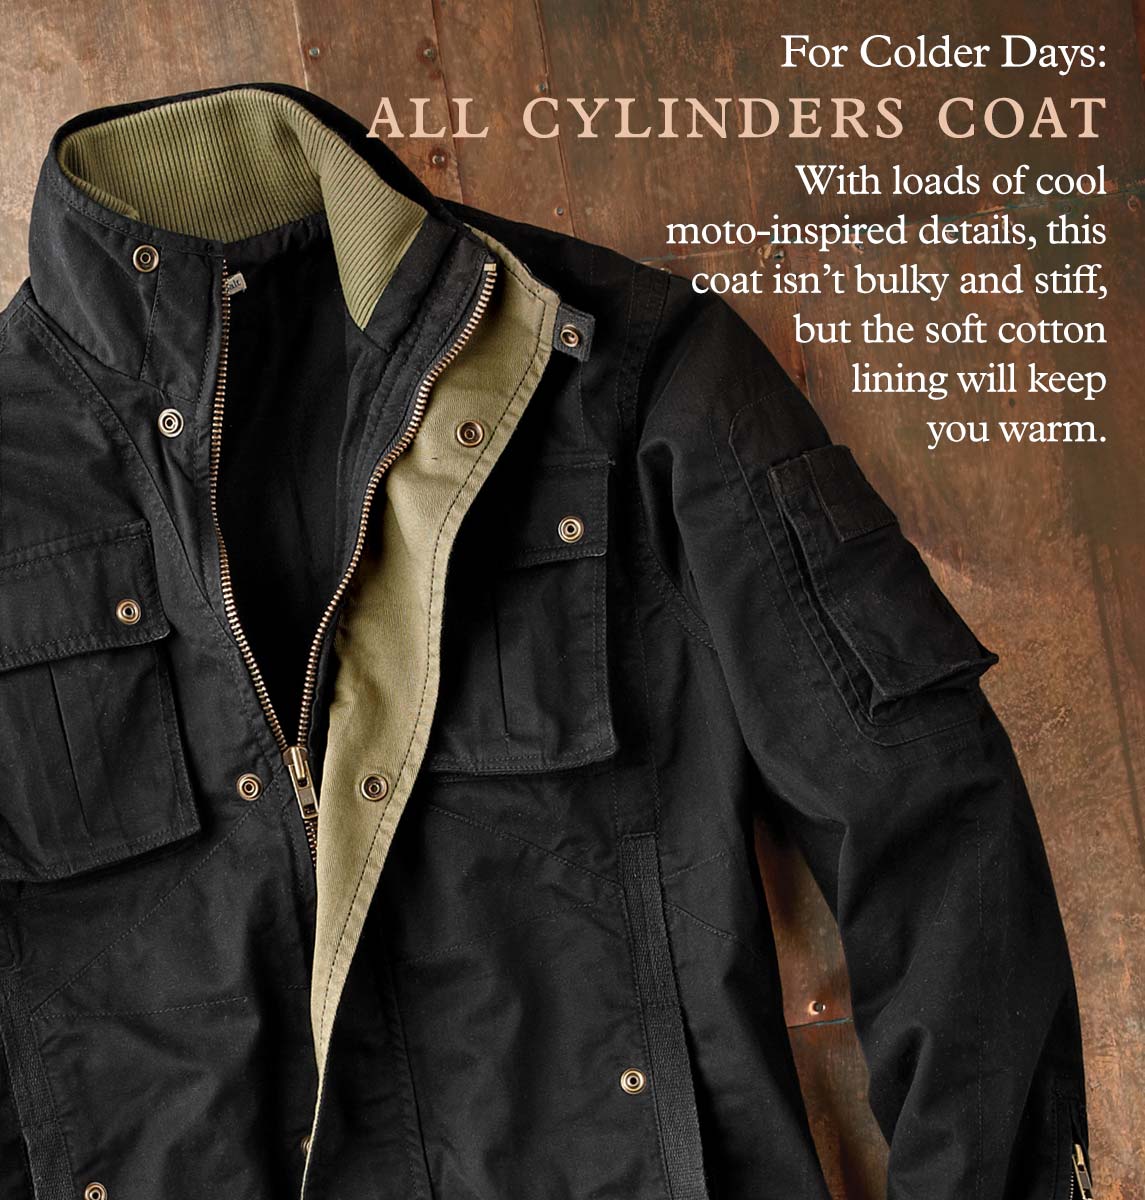 All Cylinders Coat